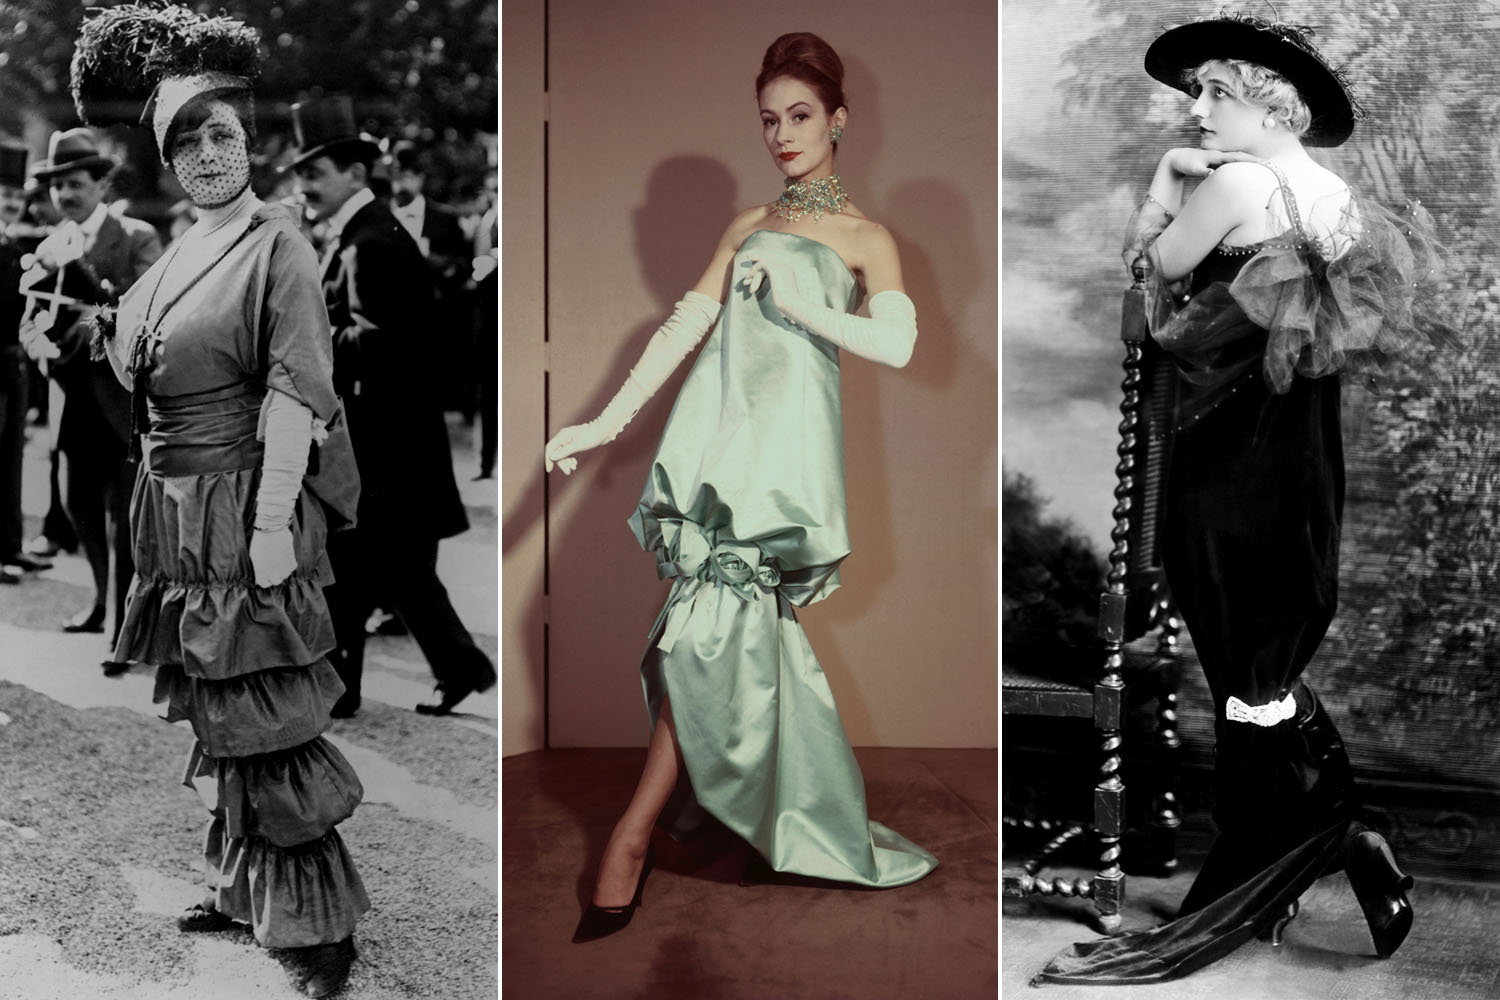 6 Weird Fashion Trends from History